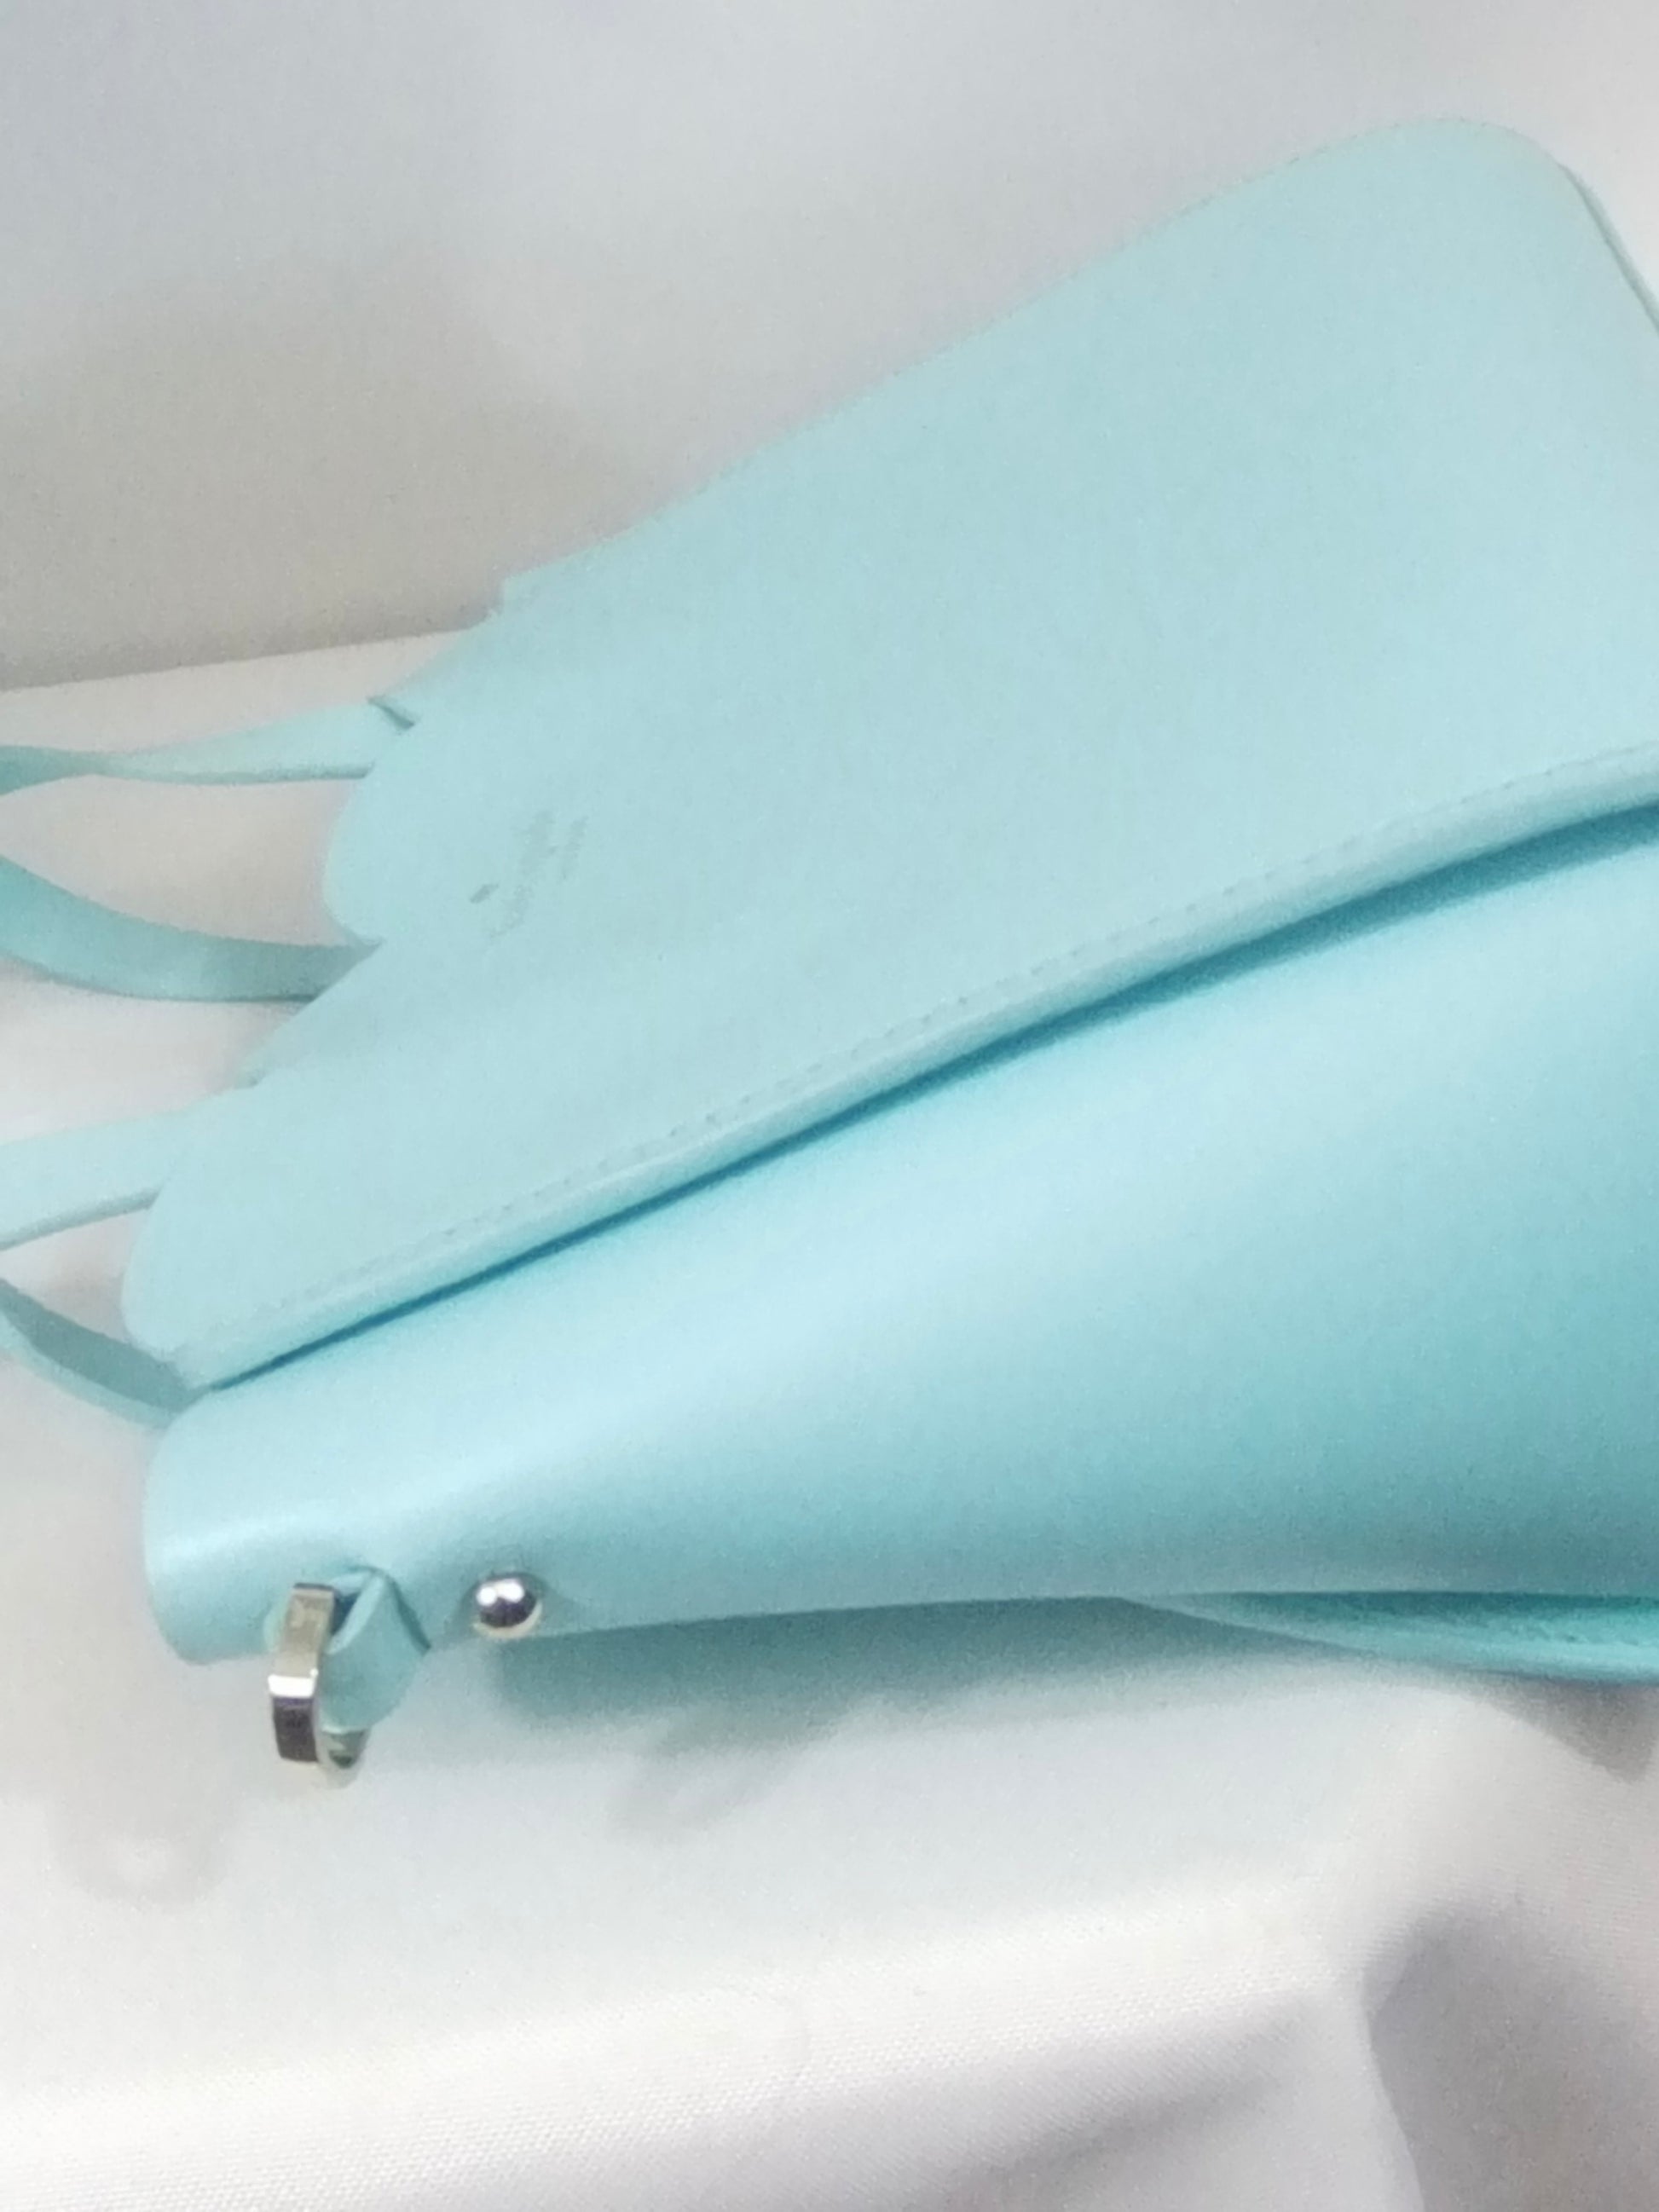 Kate Spade Turquoise Purse with Double Handles and Scalloped